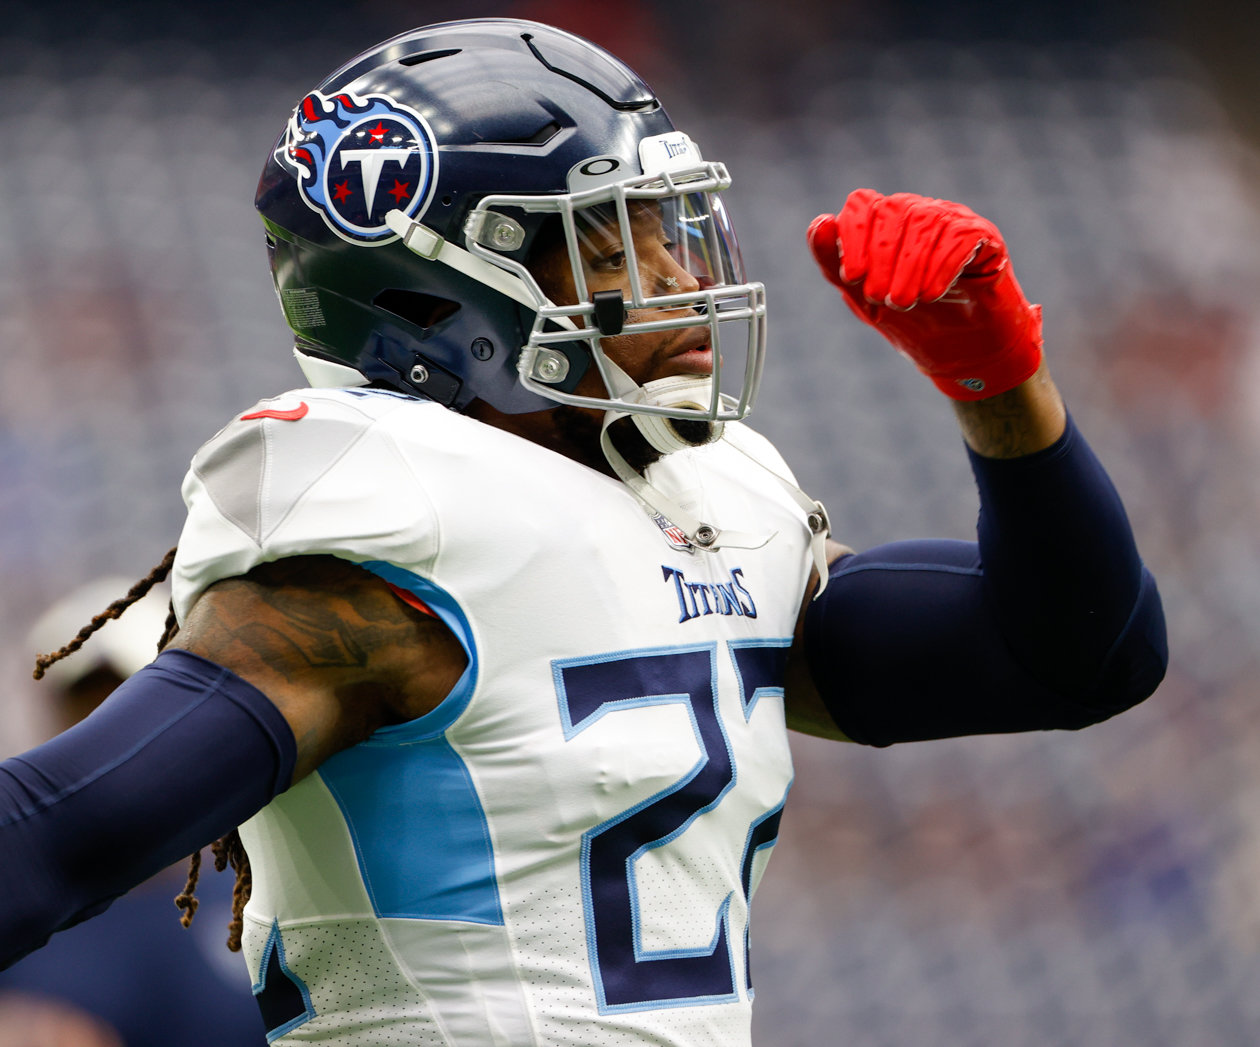 Titans running back Derrick Henry (22) warms up before the start of an NFL game between the Texans and the Titans on Oct. 30, 2022 in Houston.